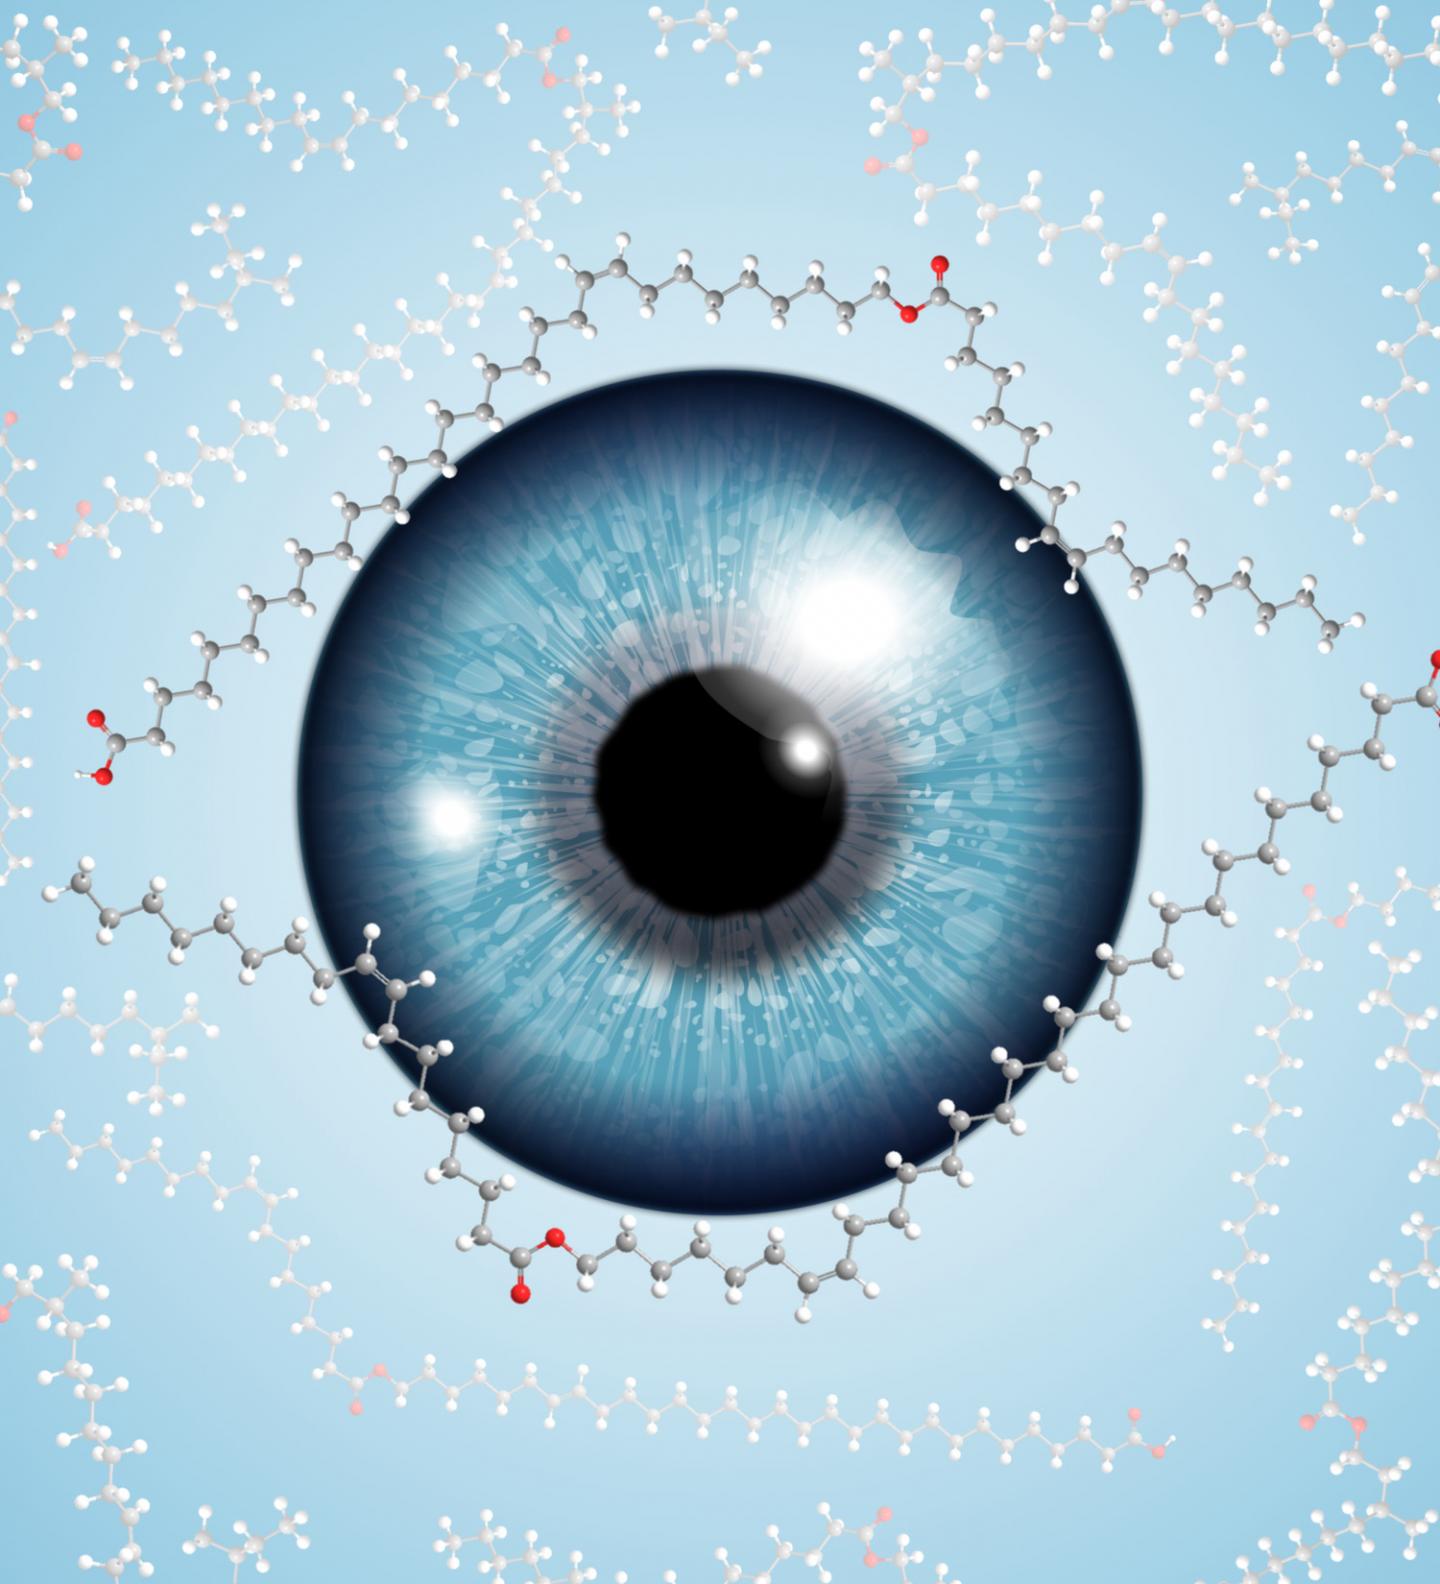 Scientists Determine Structure of a Lipid that Keeps our Eyes Clear